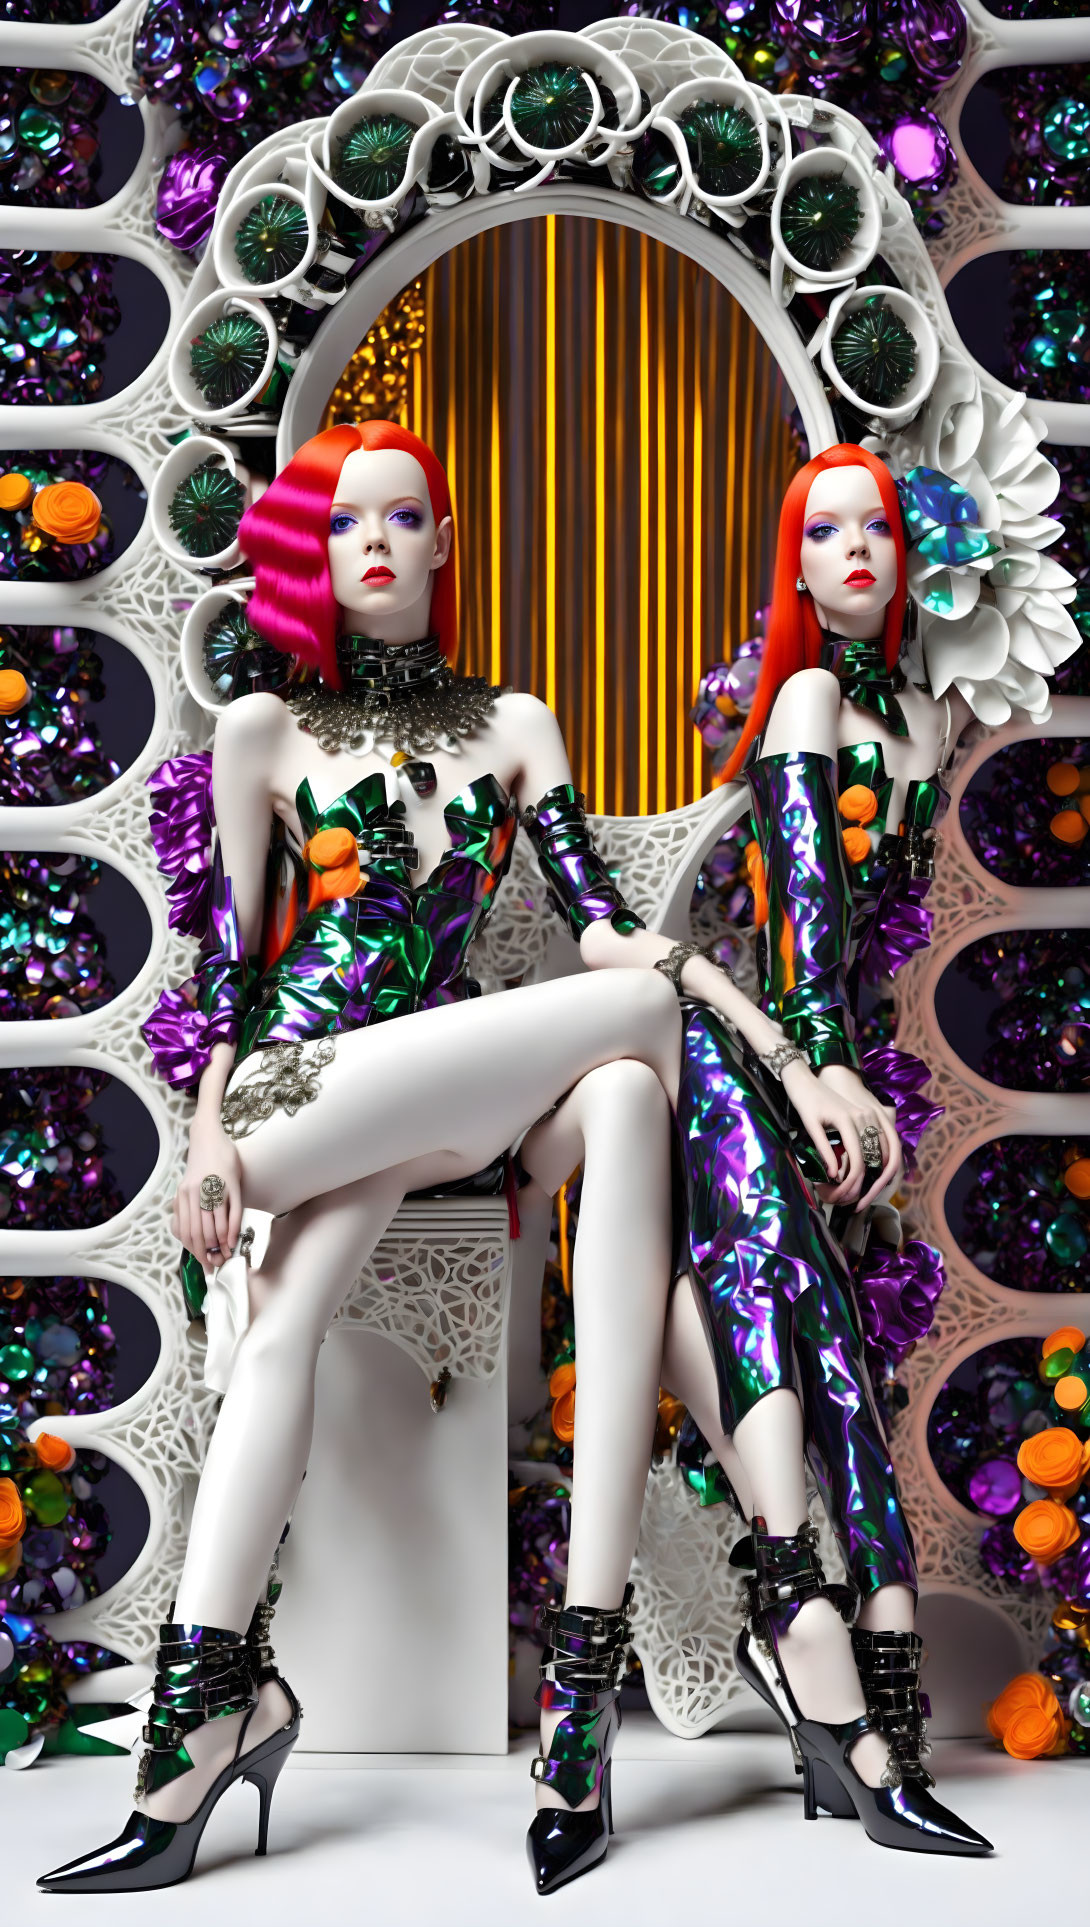 Colorful Striped Hair Mannequins in Futuristic Fashion Outfits